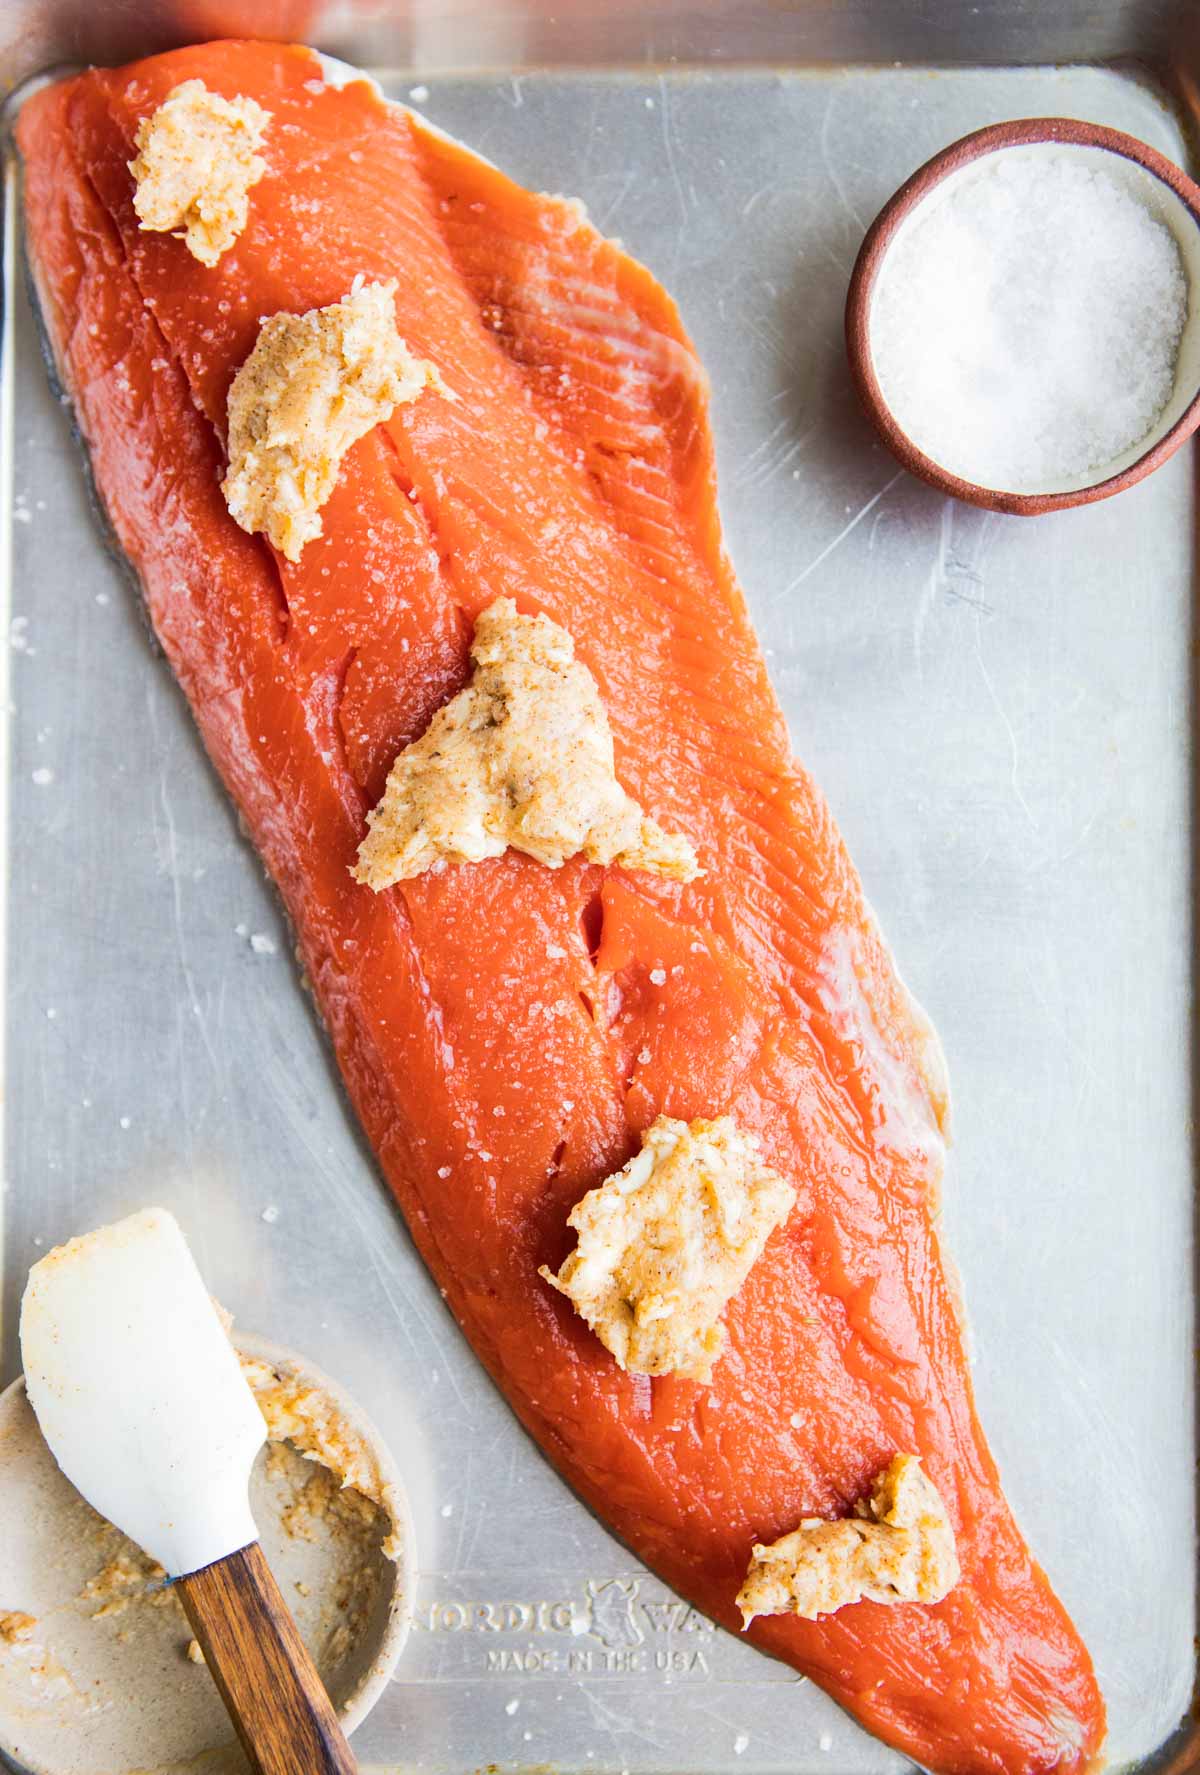 compound butter pads on top of a salmon filet